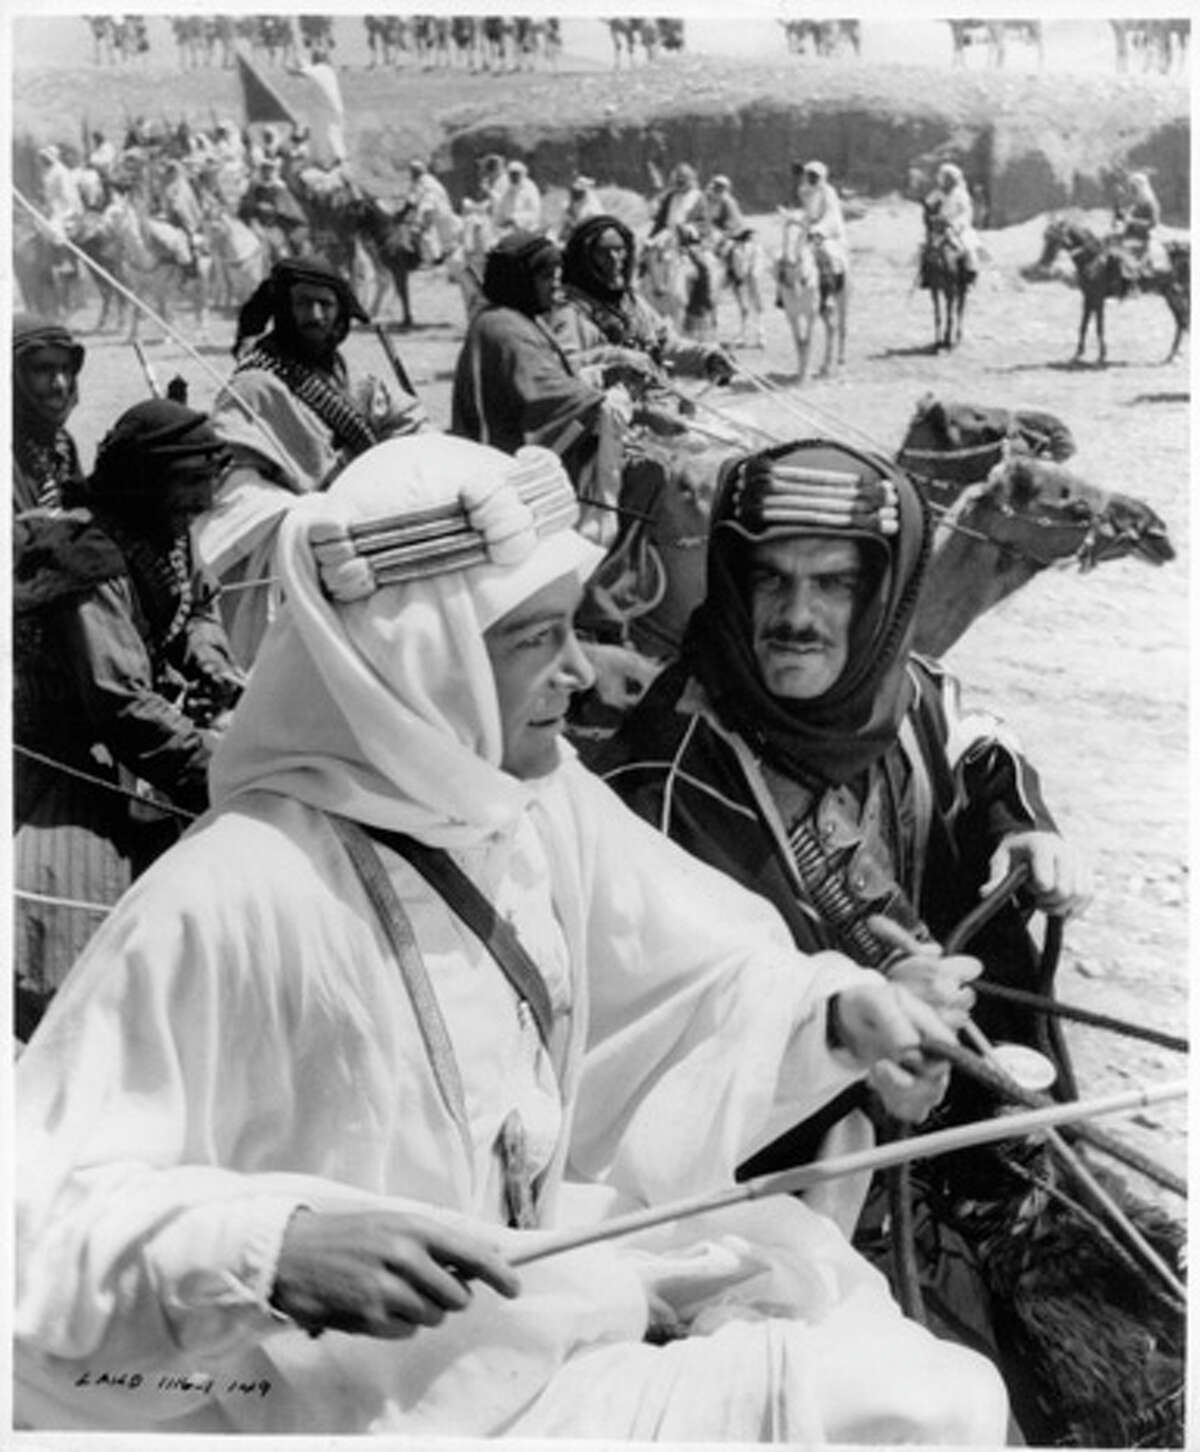 "Lawrence Of Arabia" was the Best Picture winner at the Academy Awards.